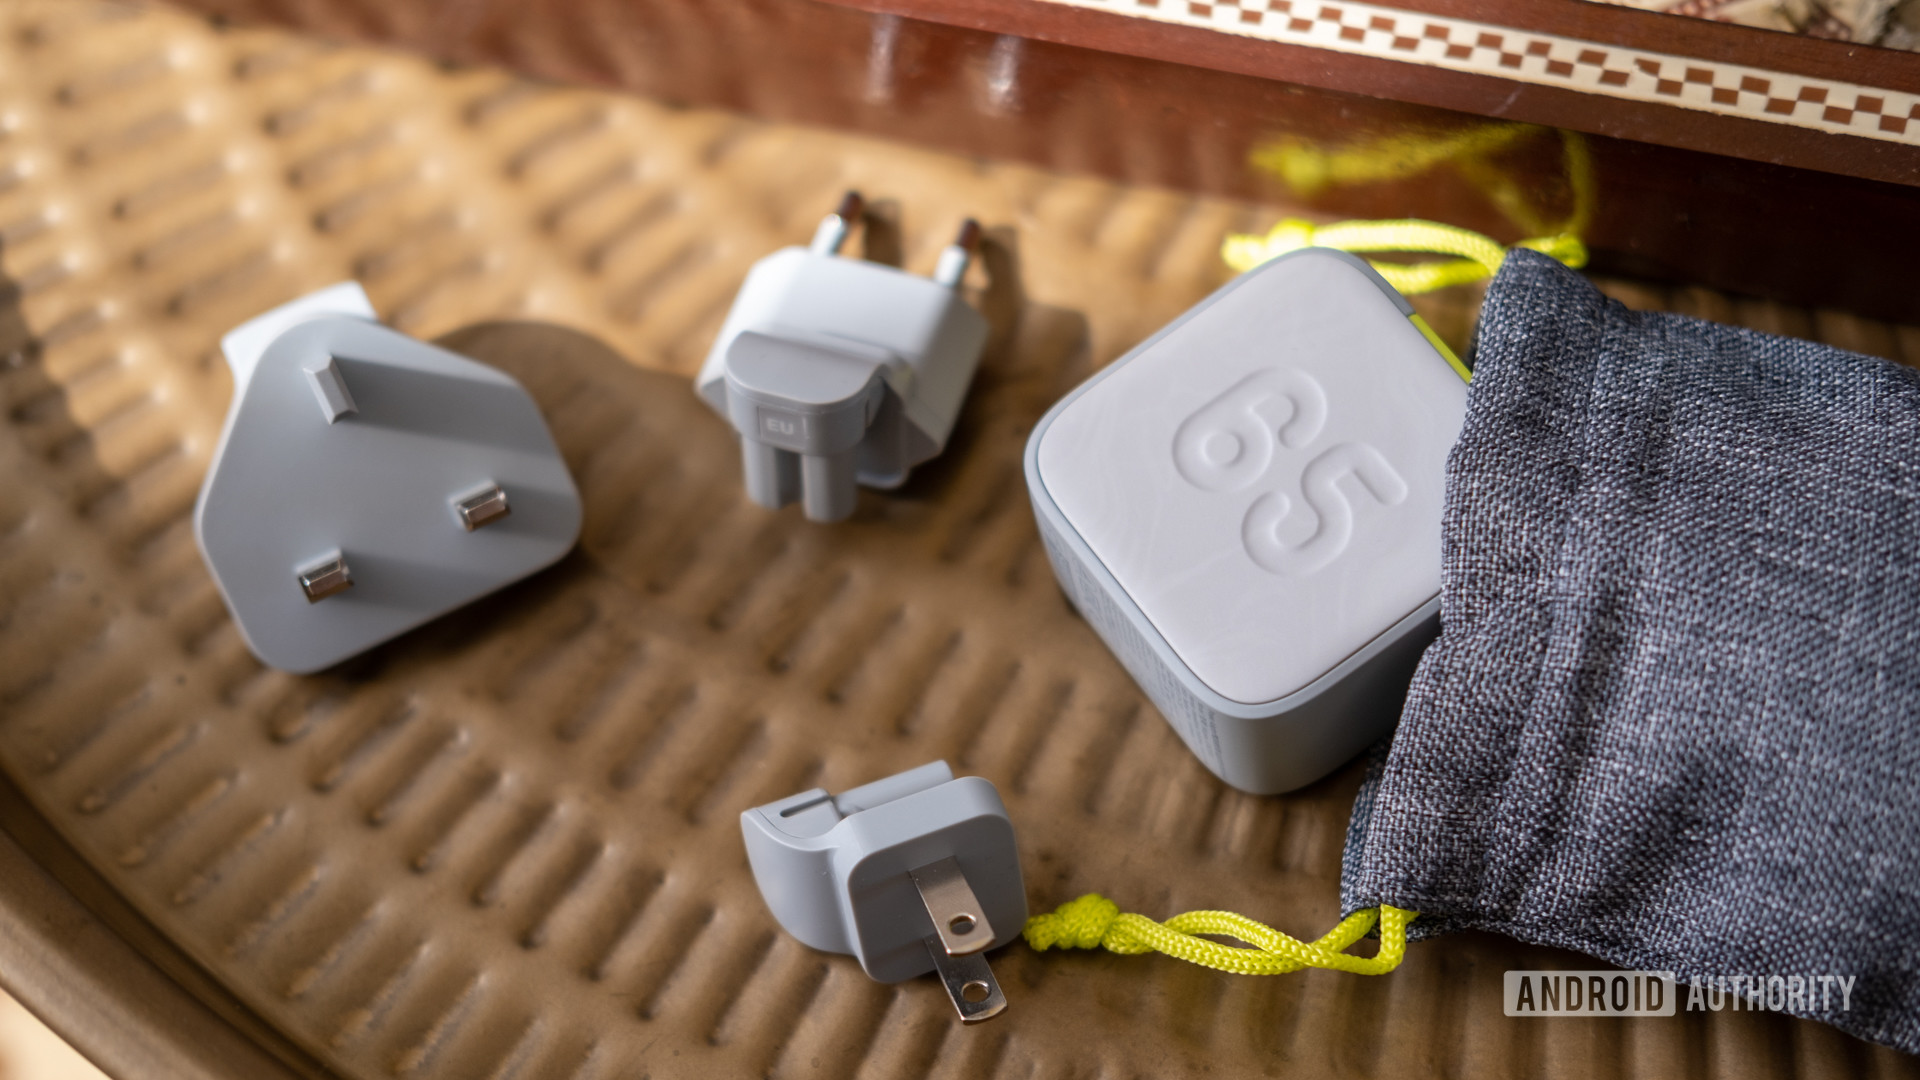 The InfinityLab InstantCharger with its carrying pouch and ports